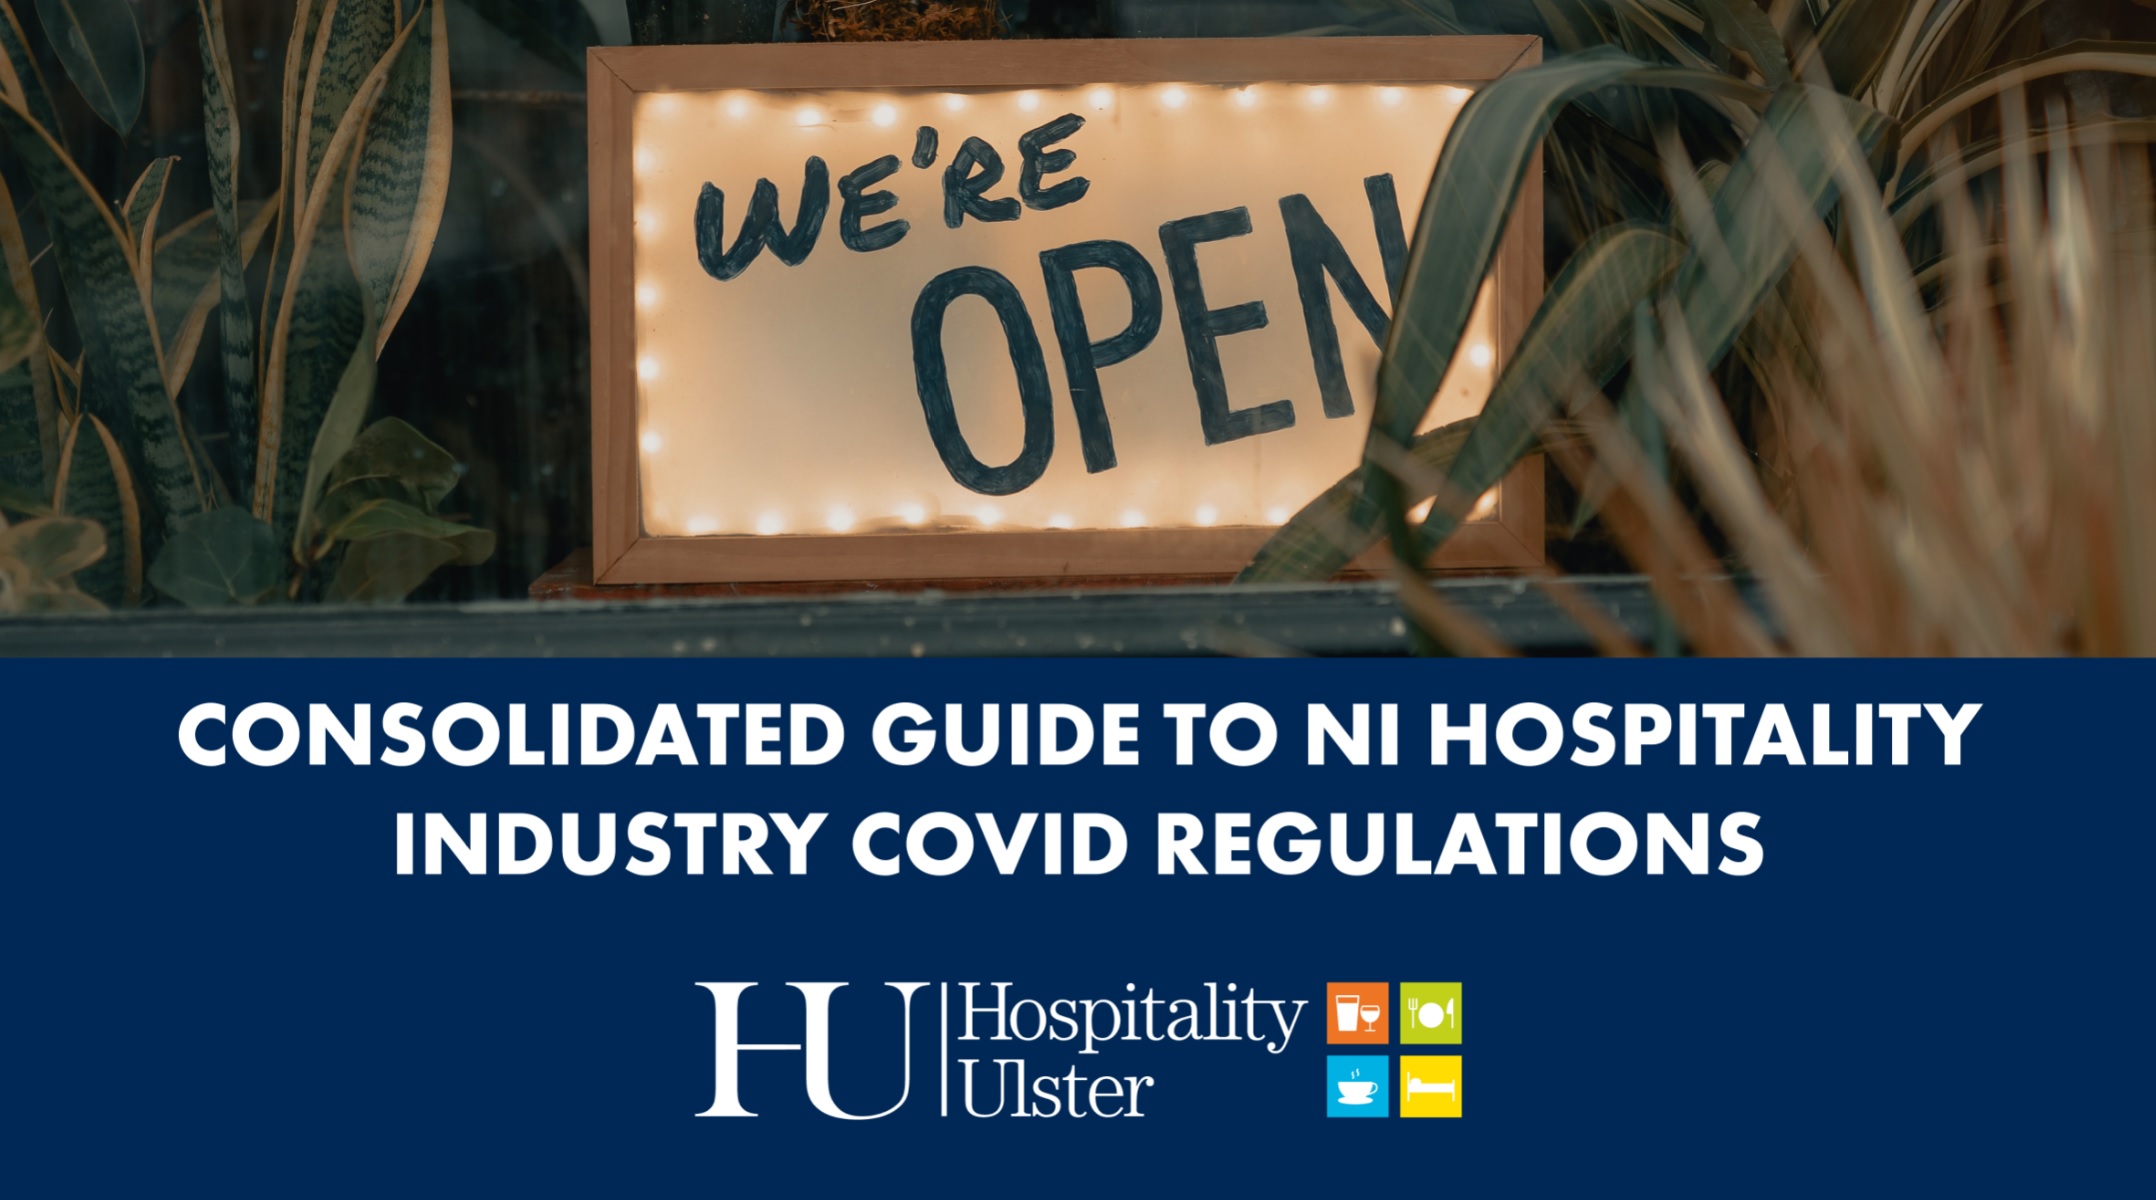 CONSOLIDATED GUIDE TO NI HOSPITALITY INDUSTRY COVID REGULATIONS